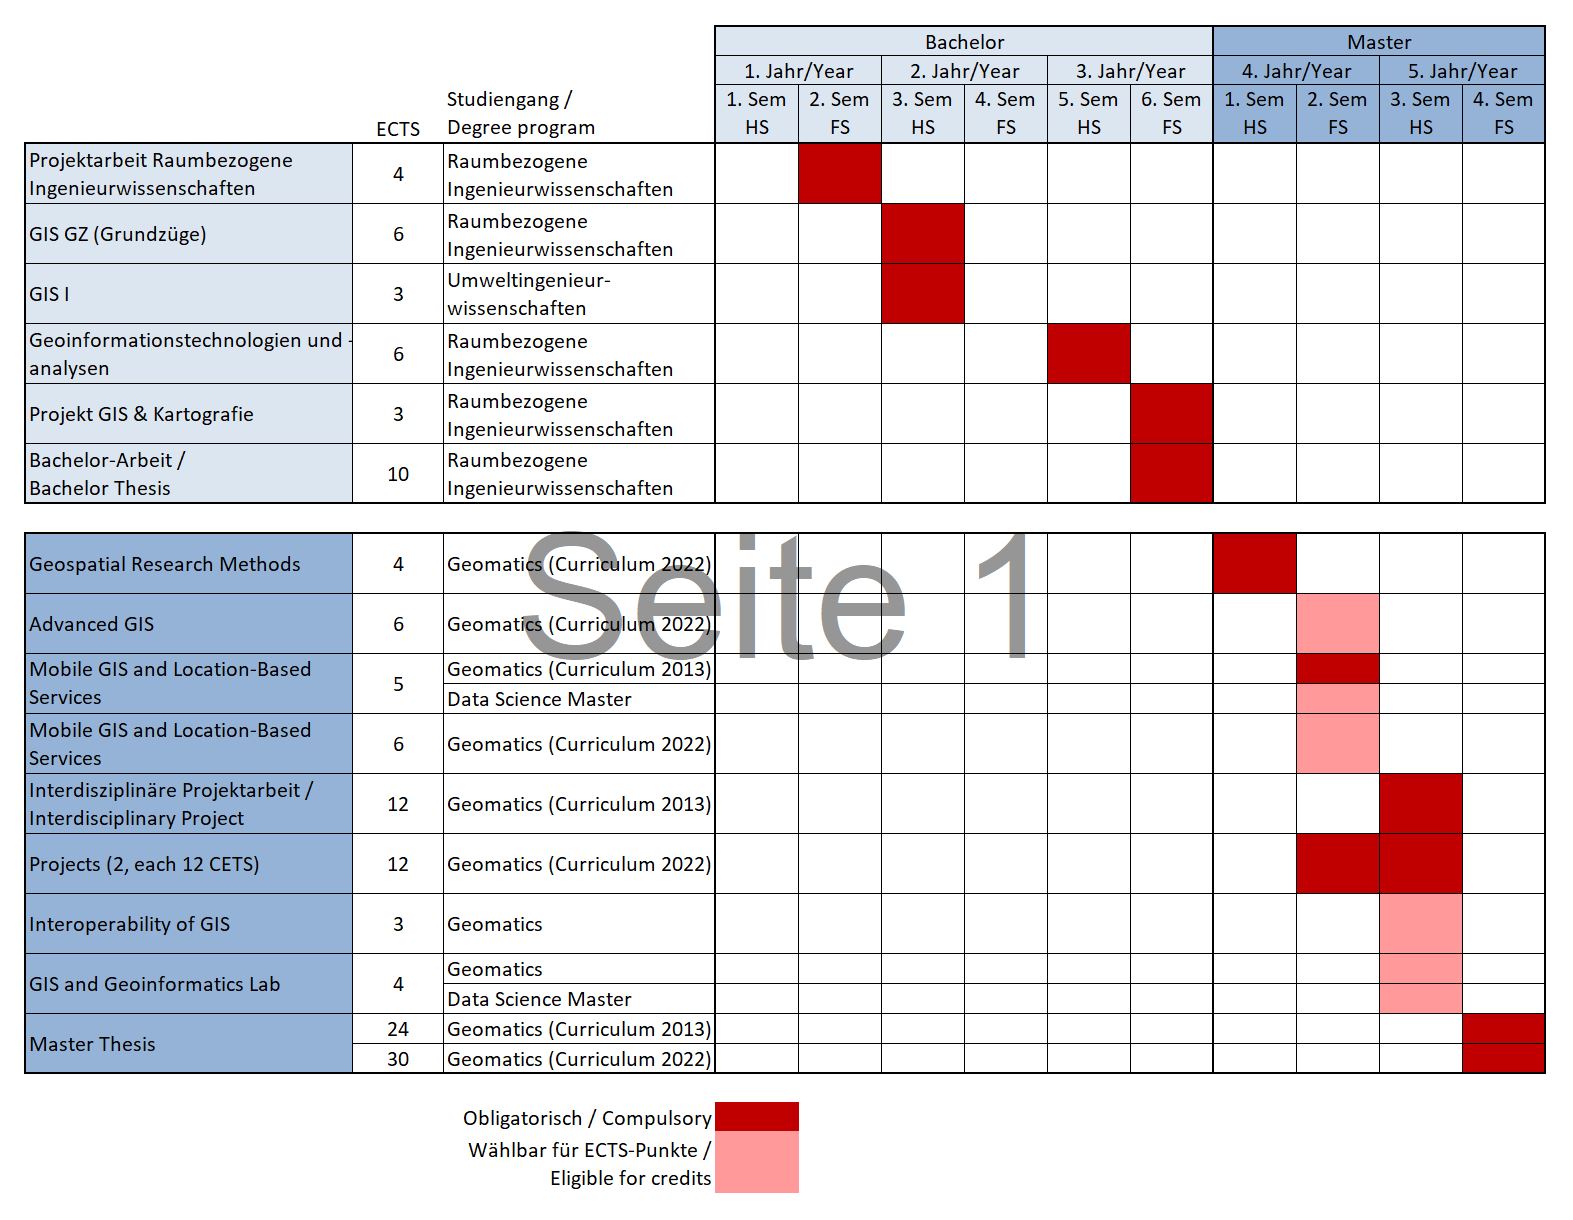 Enlarged view: Courses offered as of HS2022